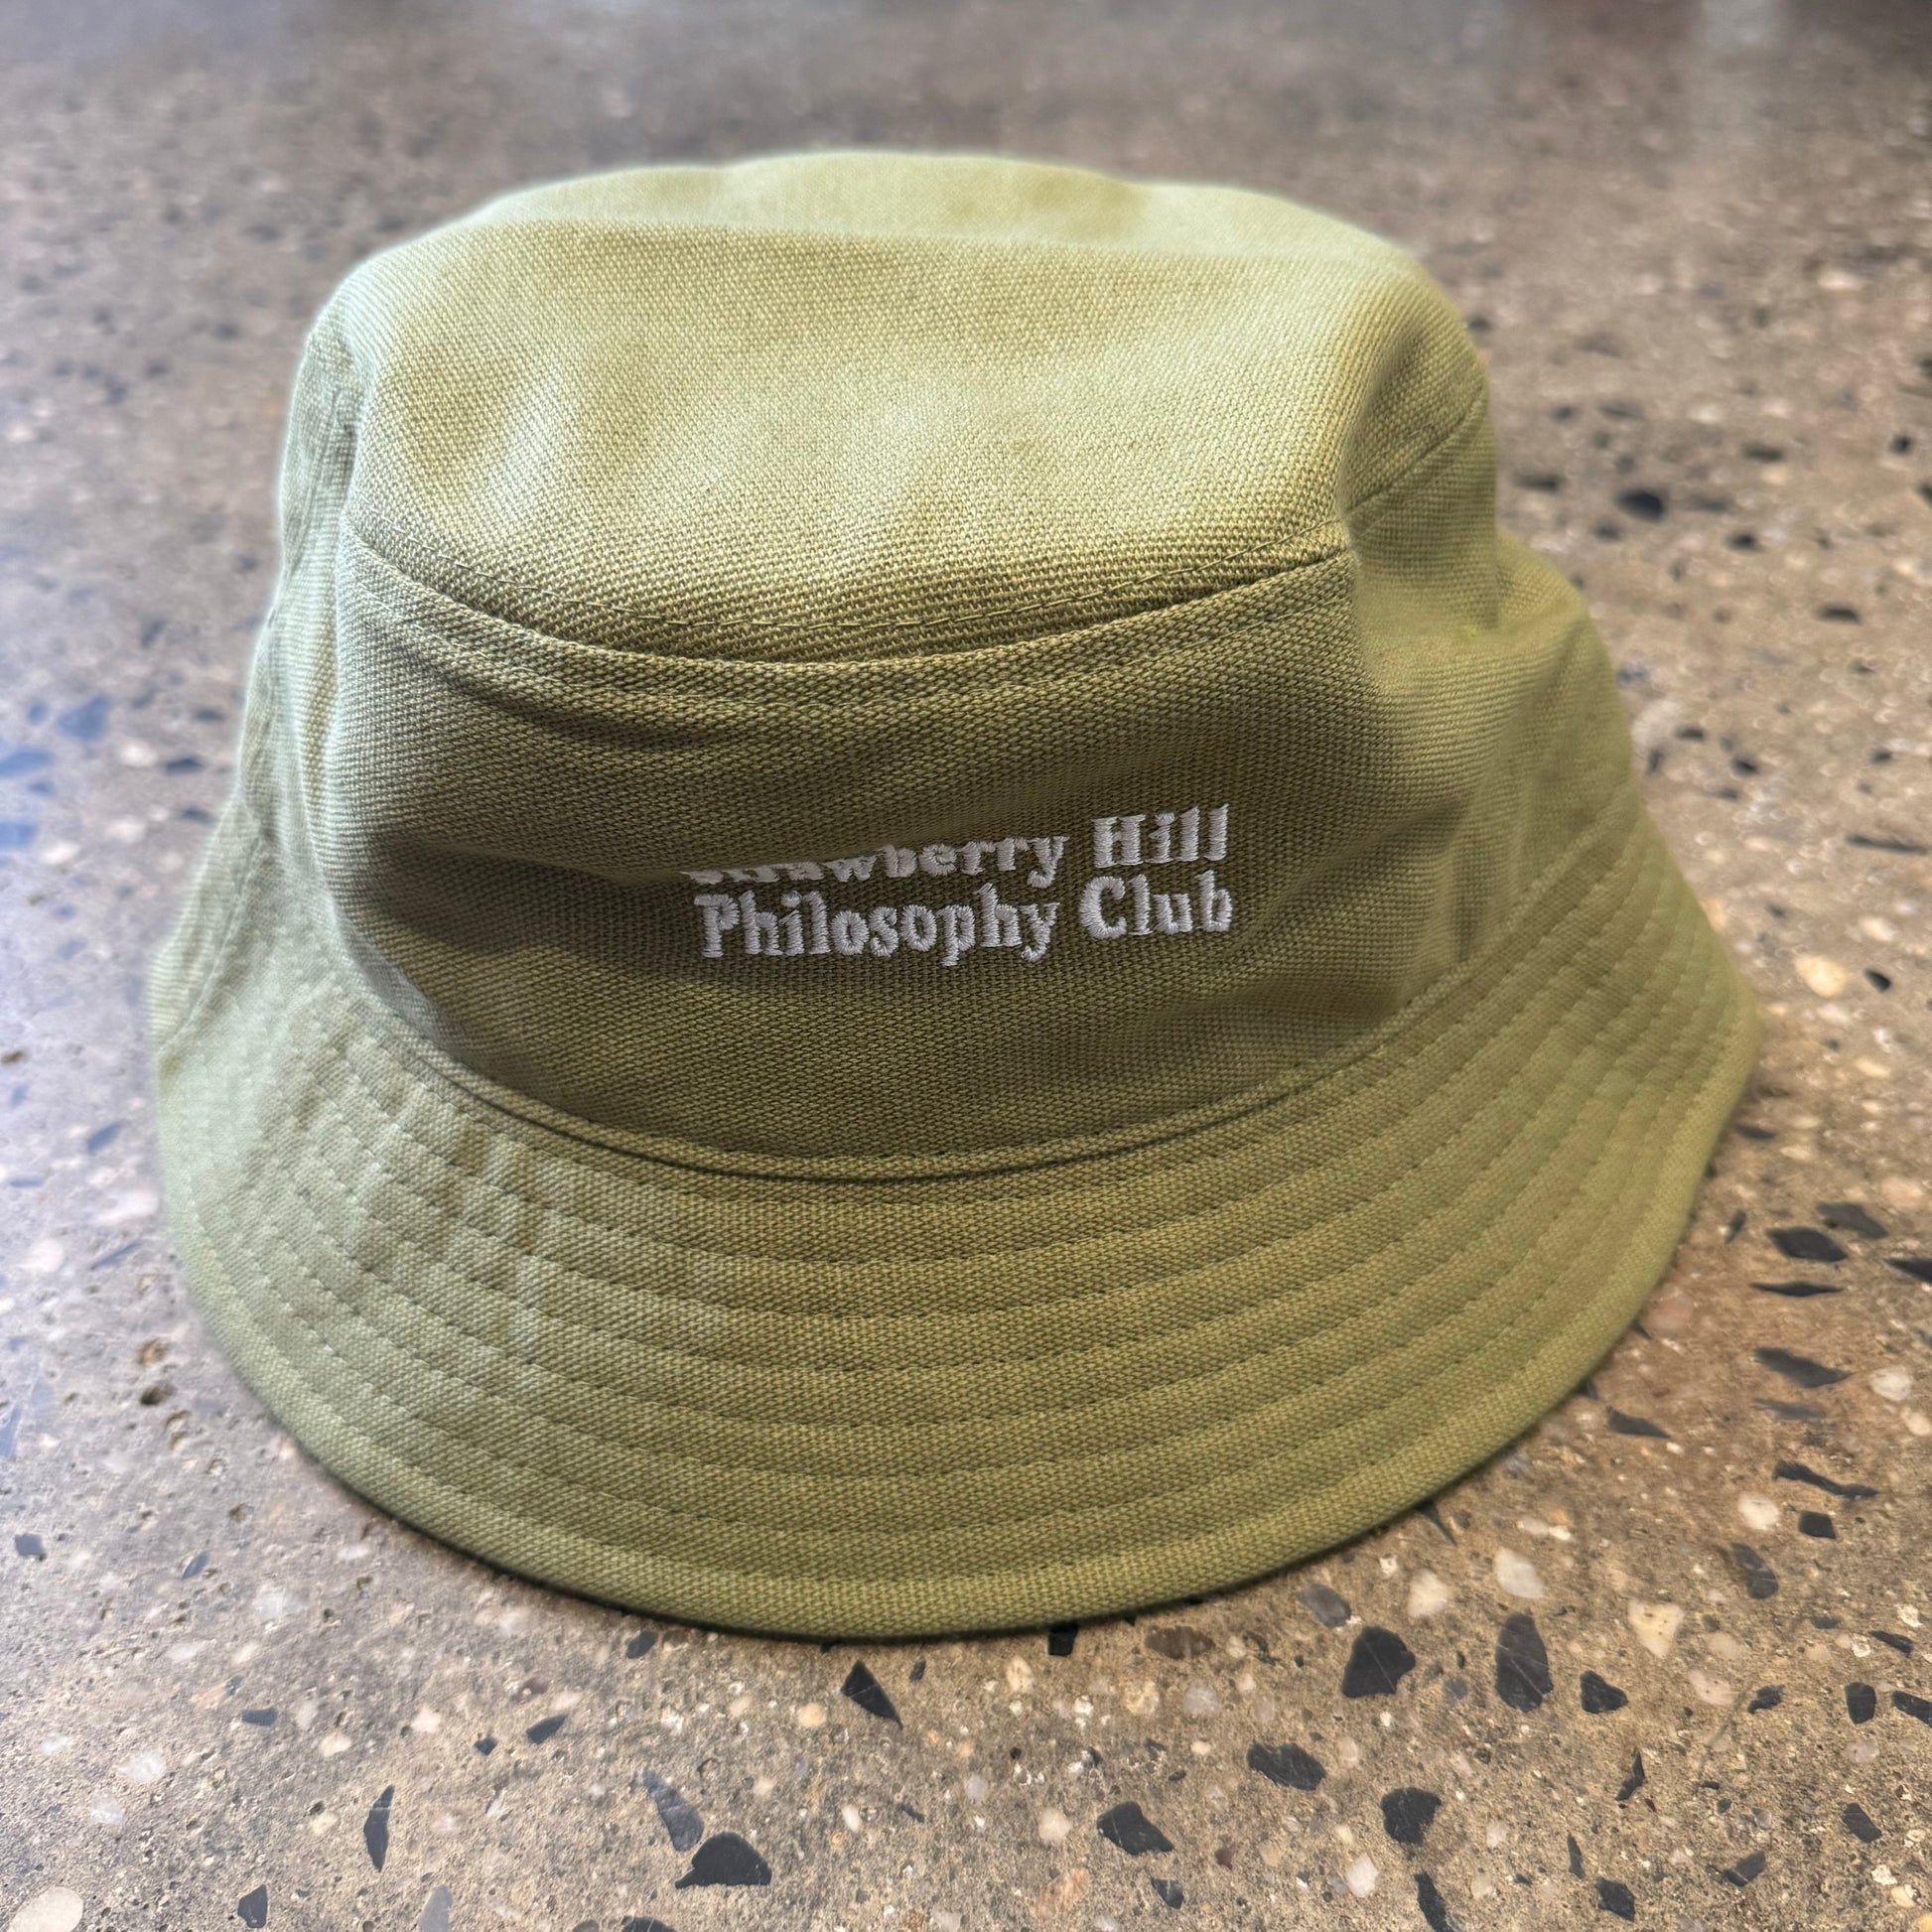 second photo olive green bucket hat white text